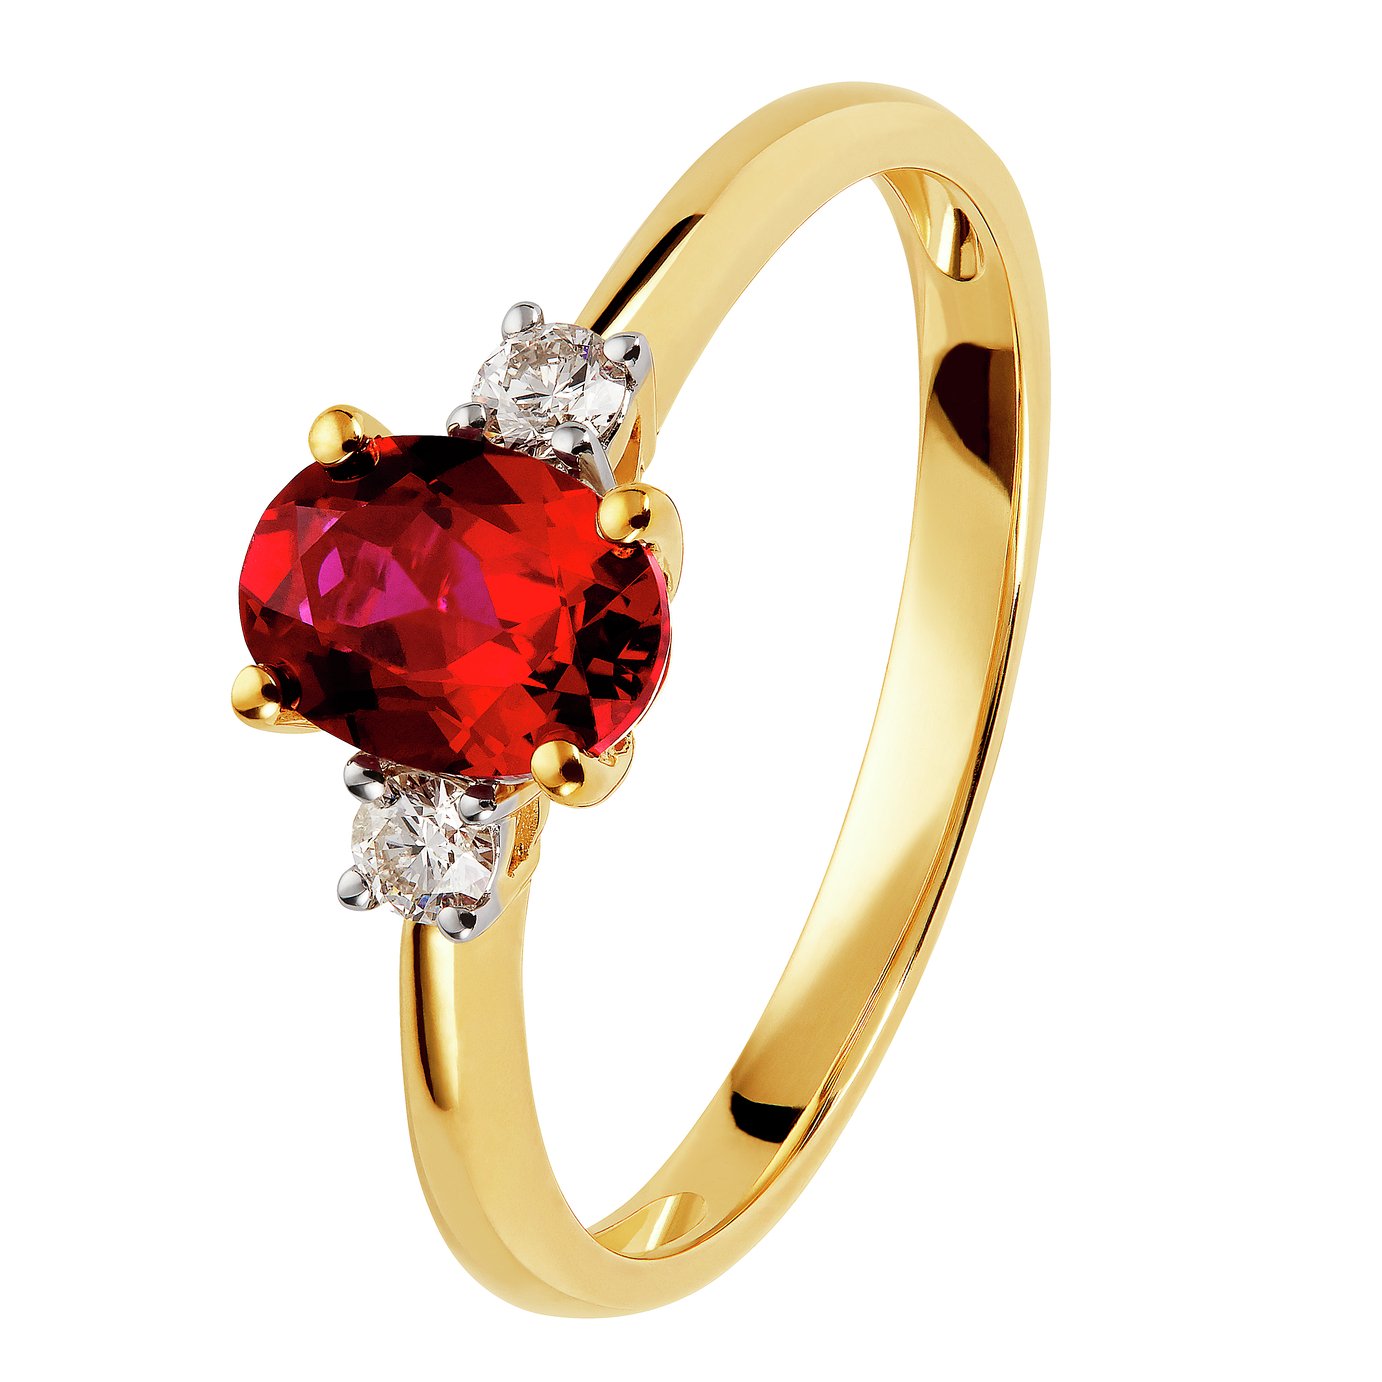 Revere 9ct Gold 0.10ct Diamond and Ruby Engagement Ring - M